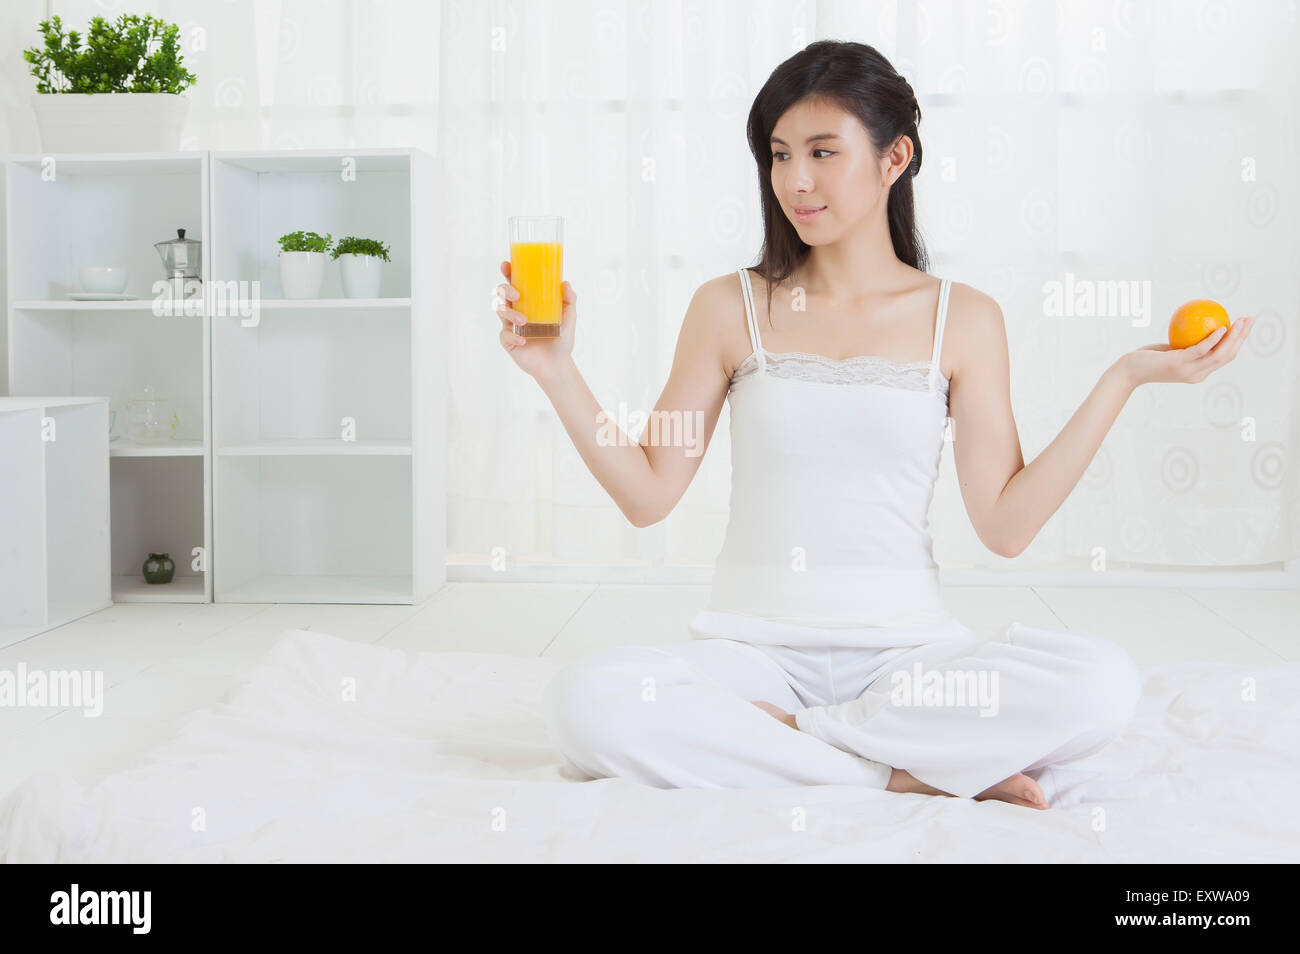 Young woman holding a glass of orange juice and looking away, Stock Photo